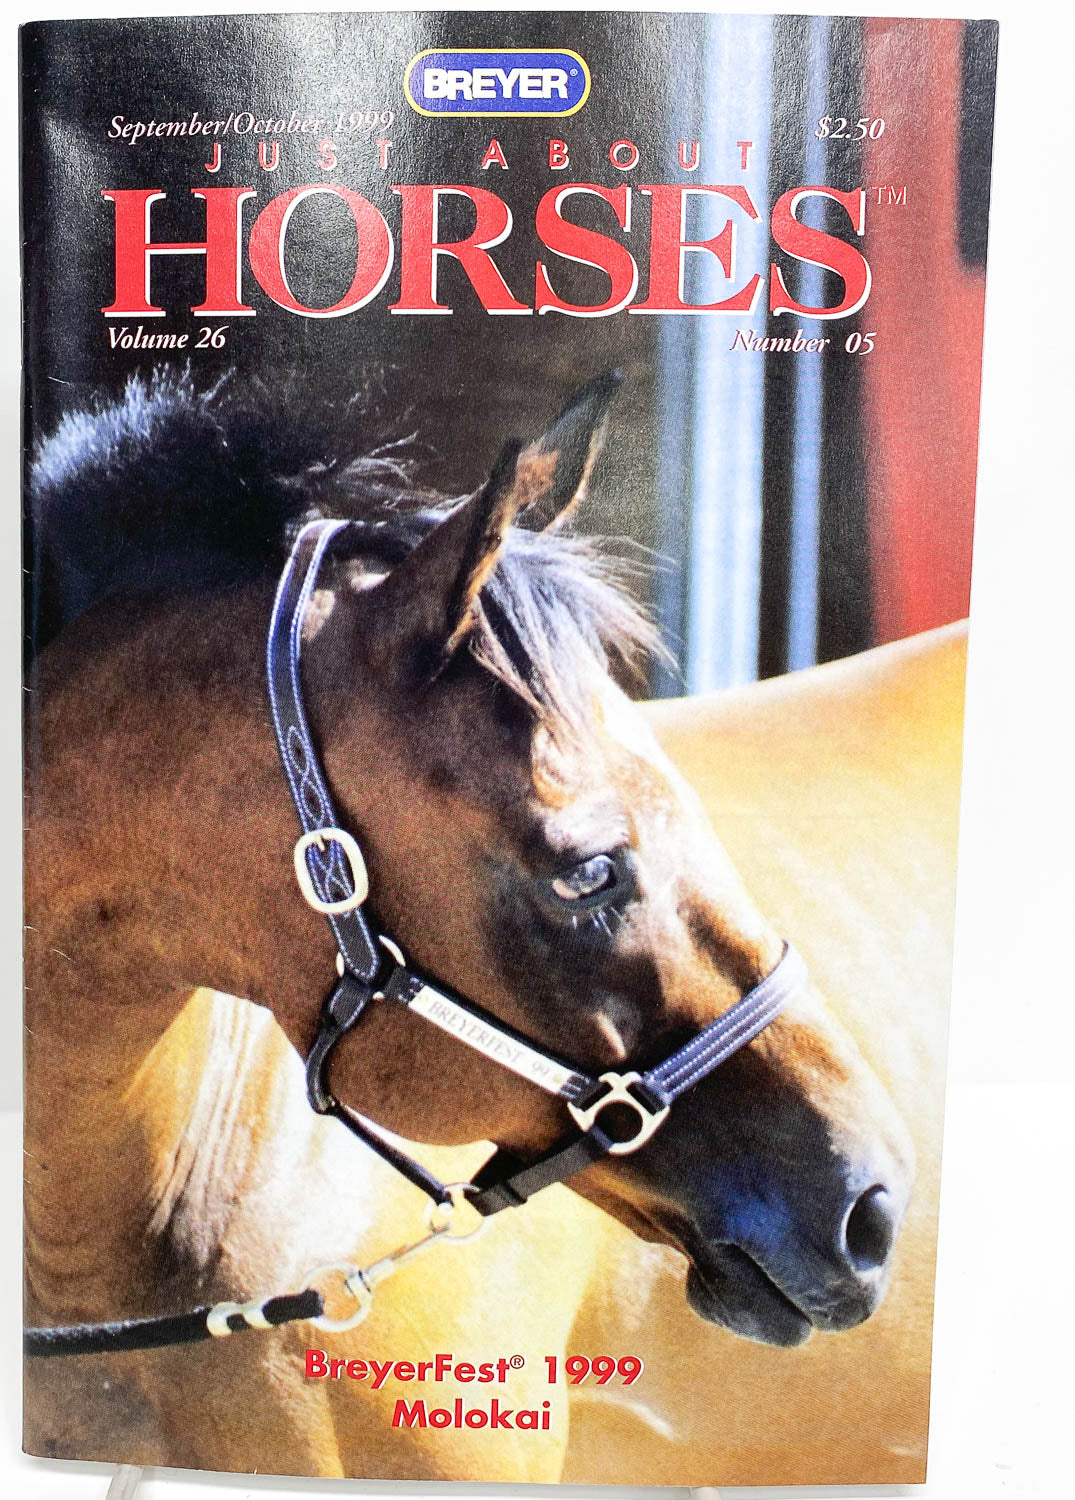 Just About Horses Magazine Vol. 26, No. 5, 1999 Sept/Oct